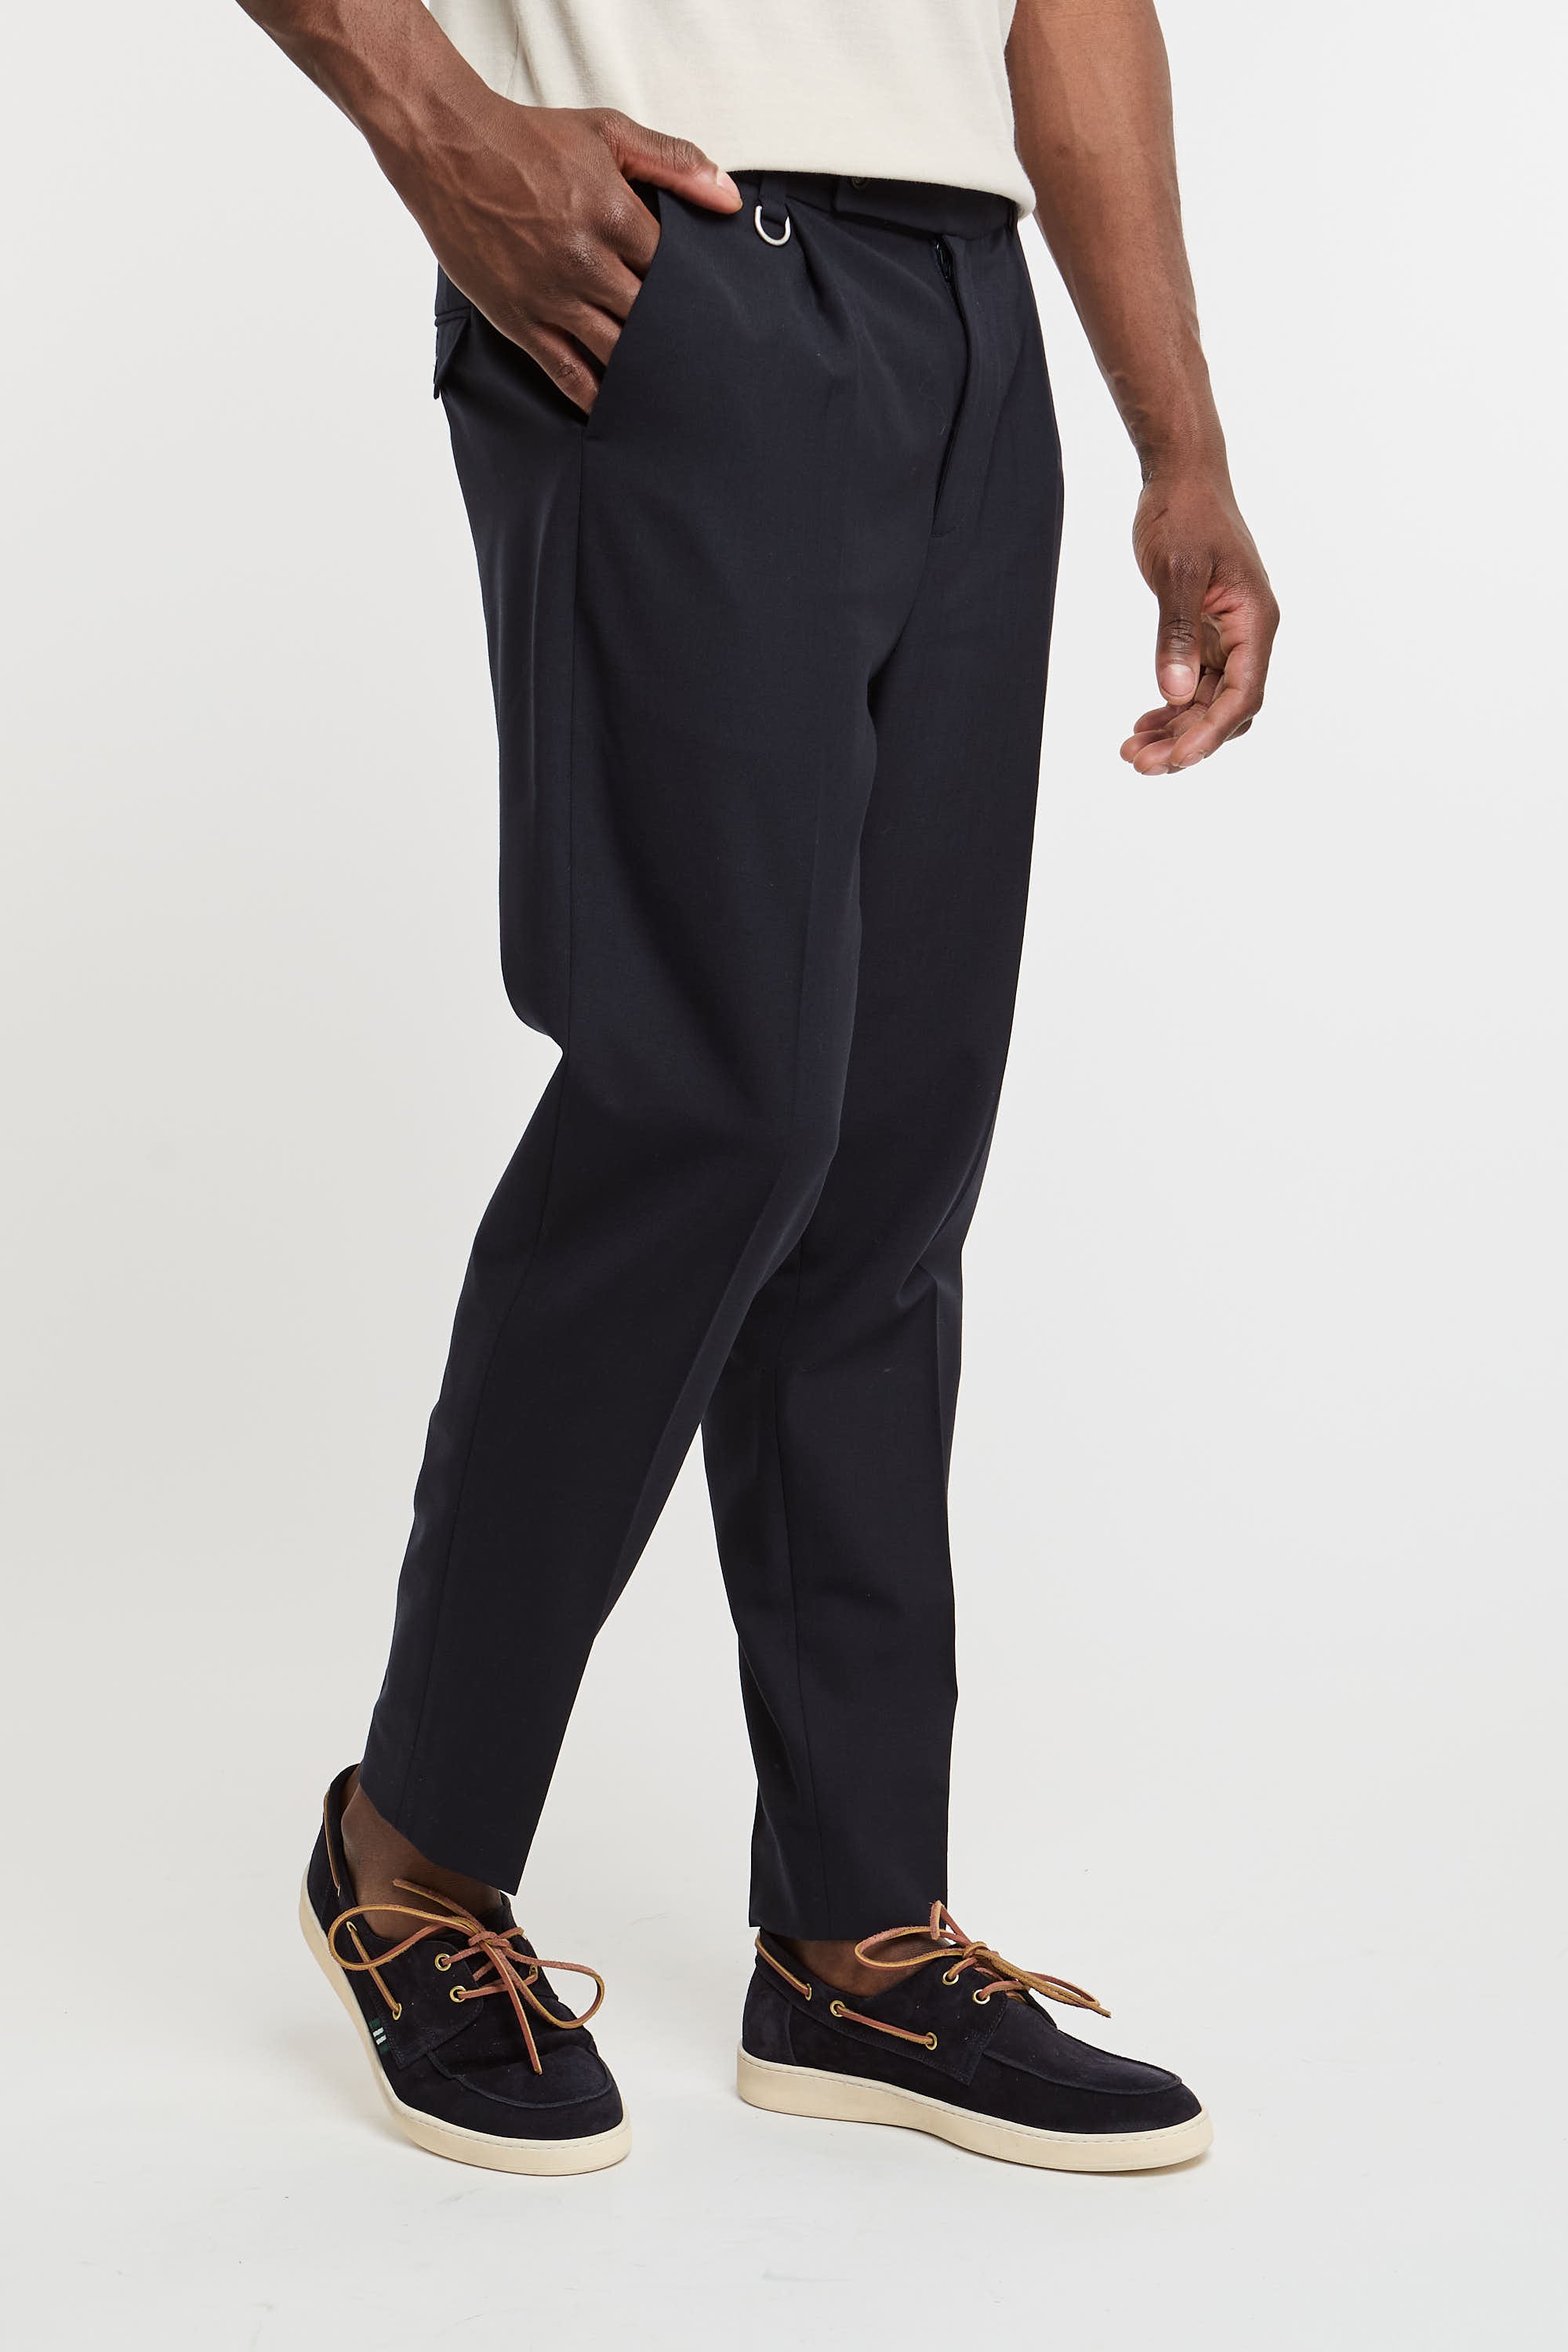 Paolo Pecora Wool/Polyester/Elastane Blue Trousers-3